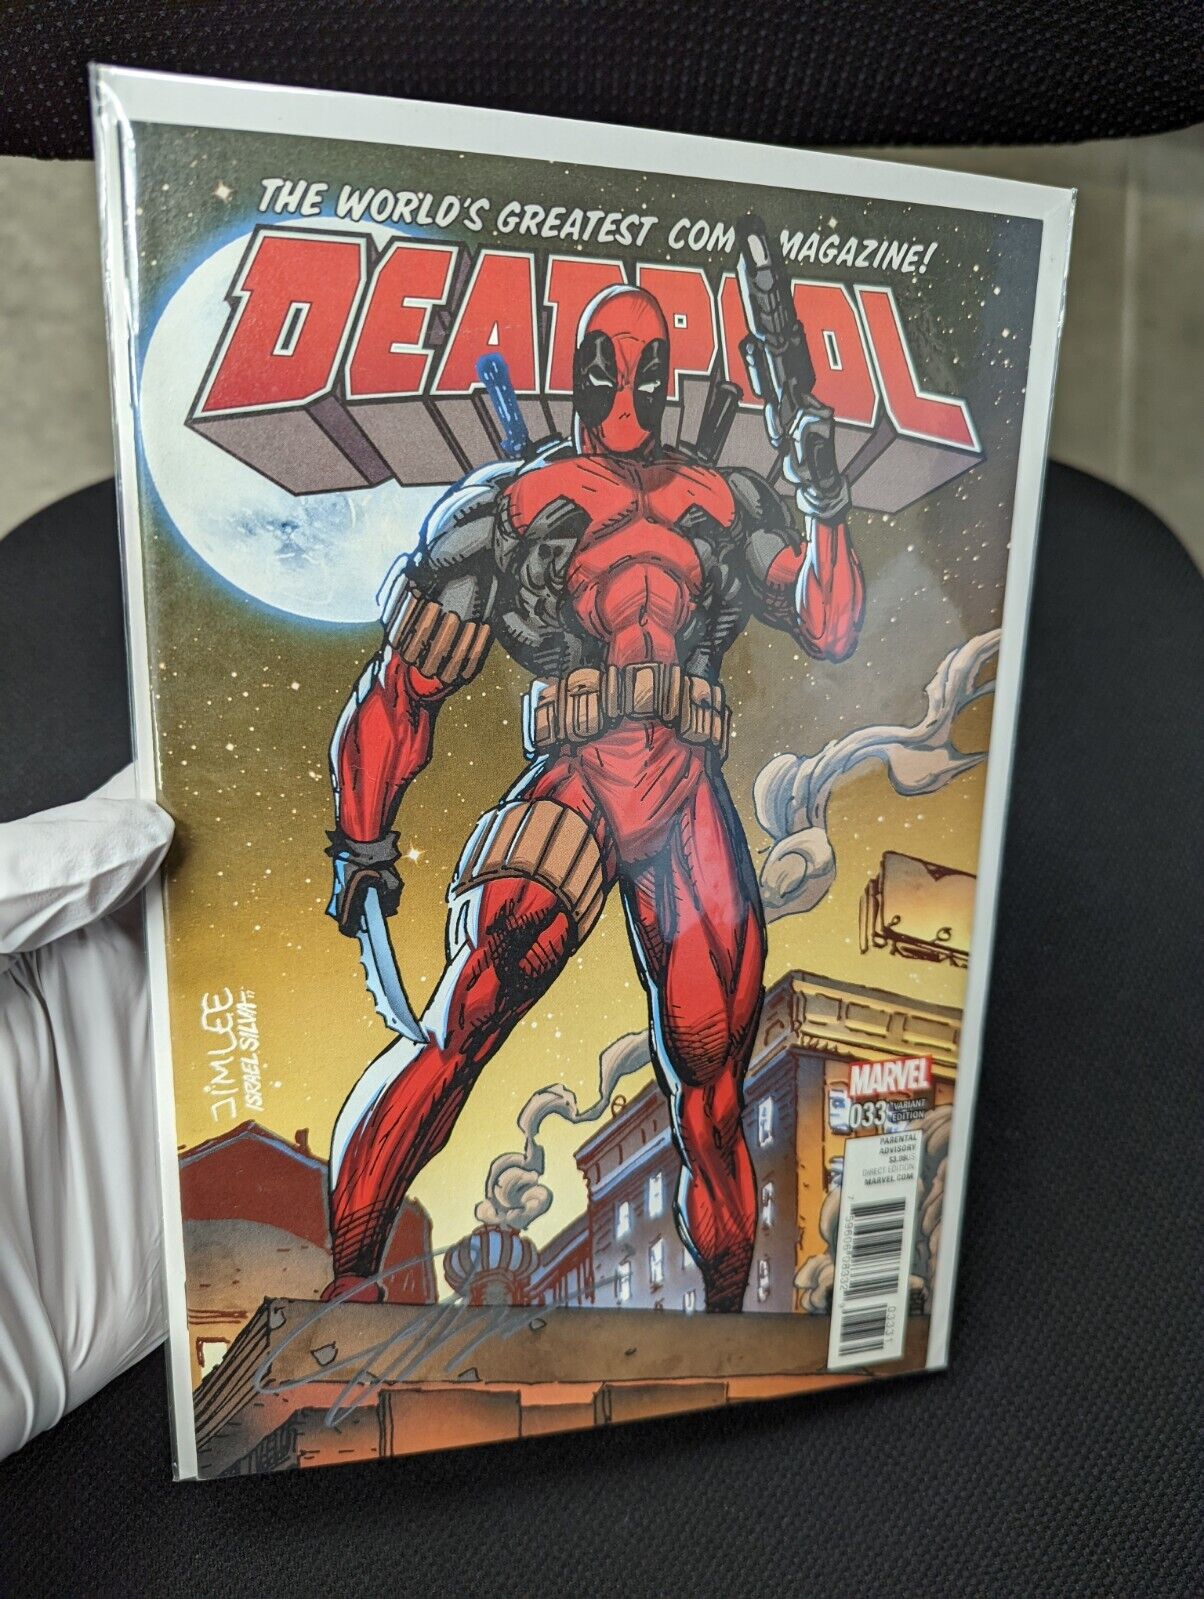 Deadpool #33 Trading Card Variant Signed By Jim Lee